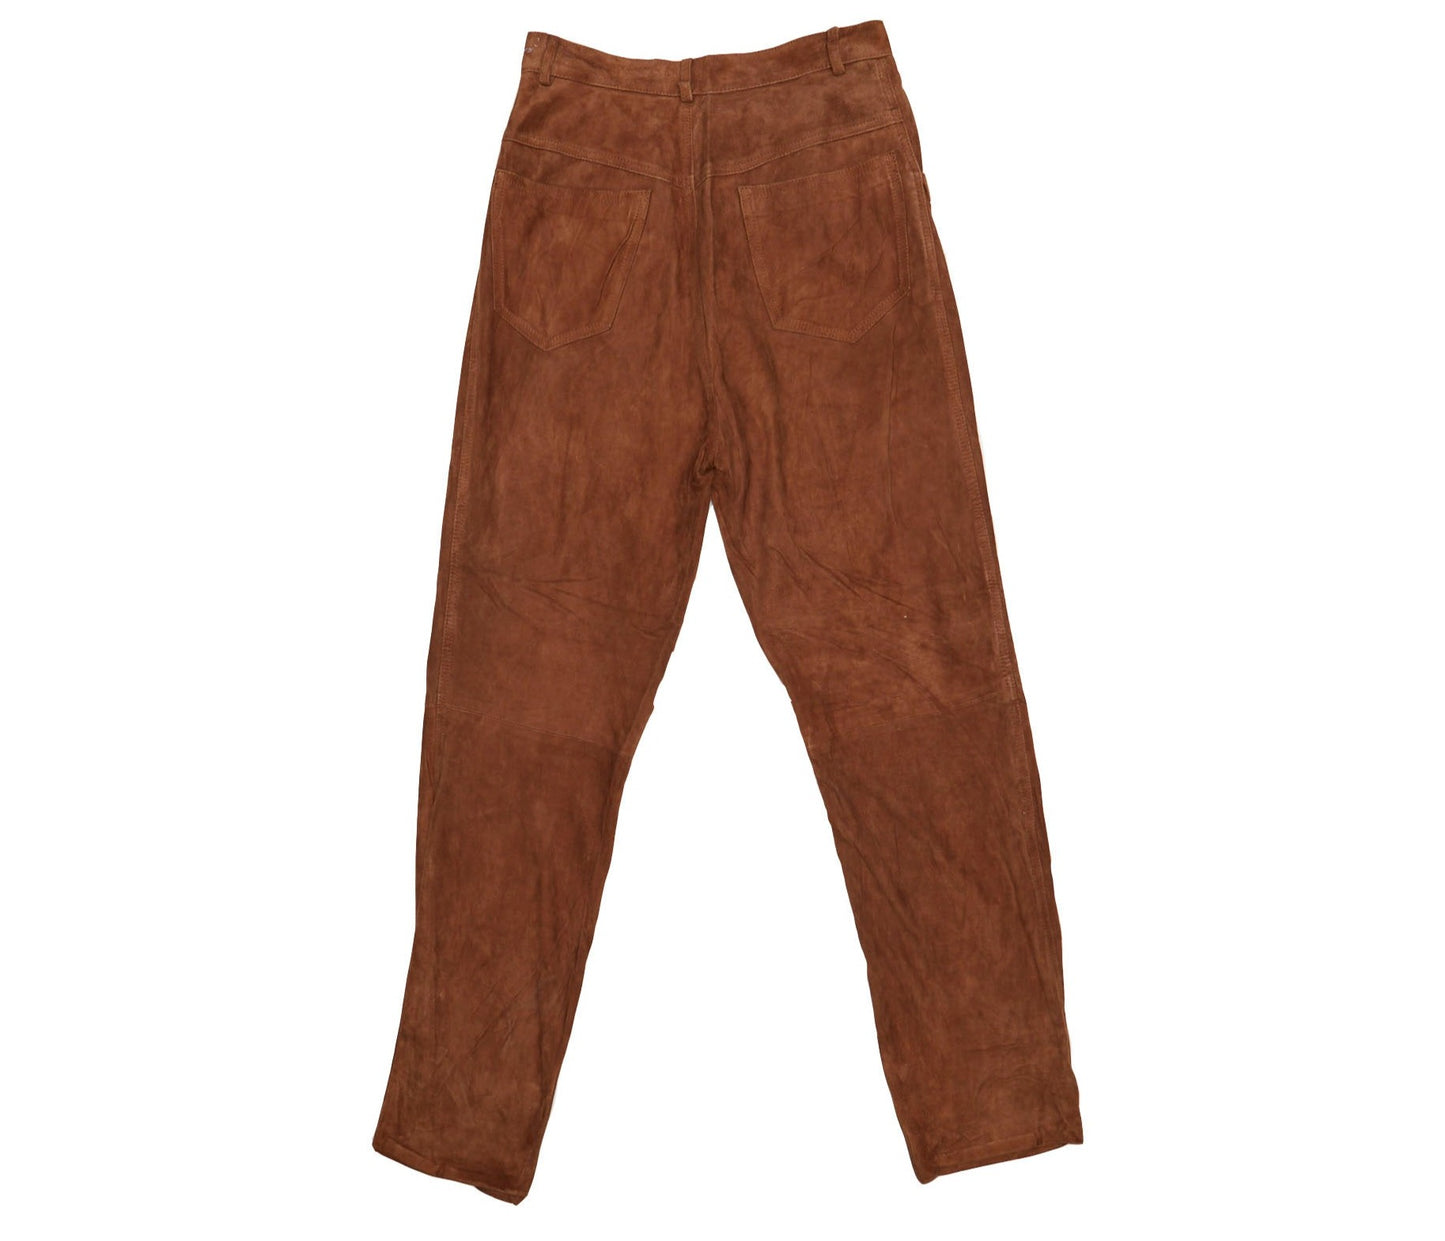 Womens Suede Trousers - W26" L28"